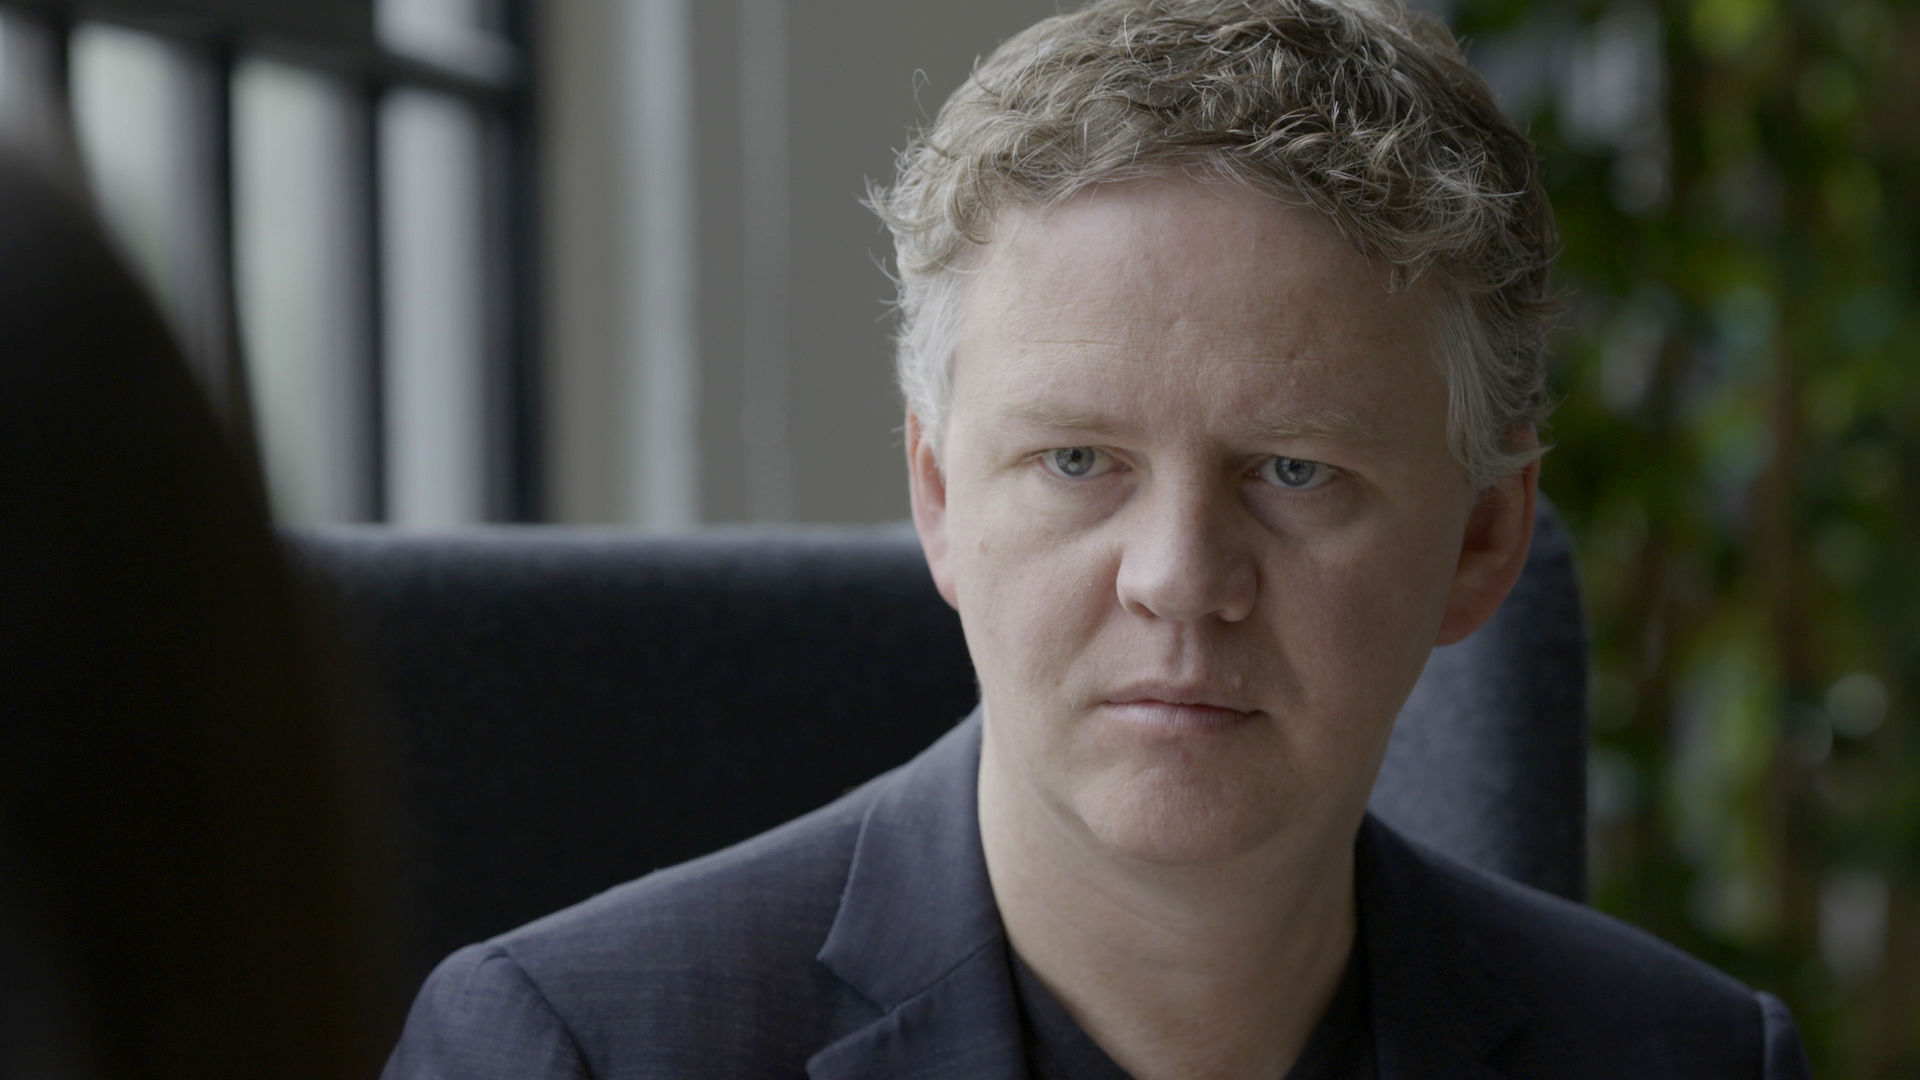 Matthew Prince is the CEO of Cloudflare